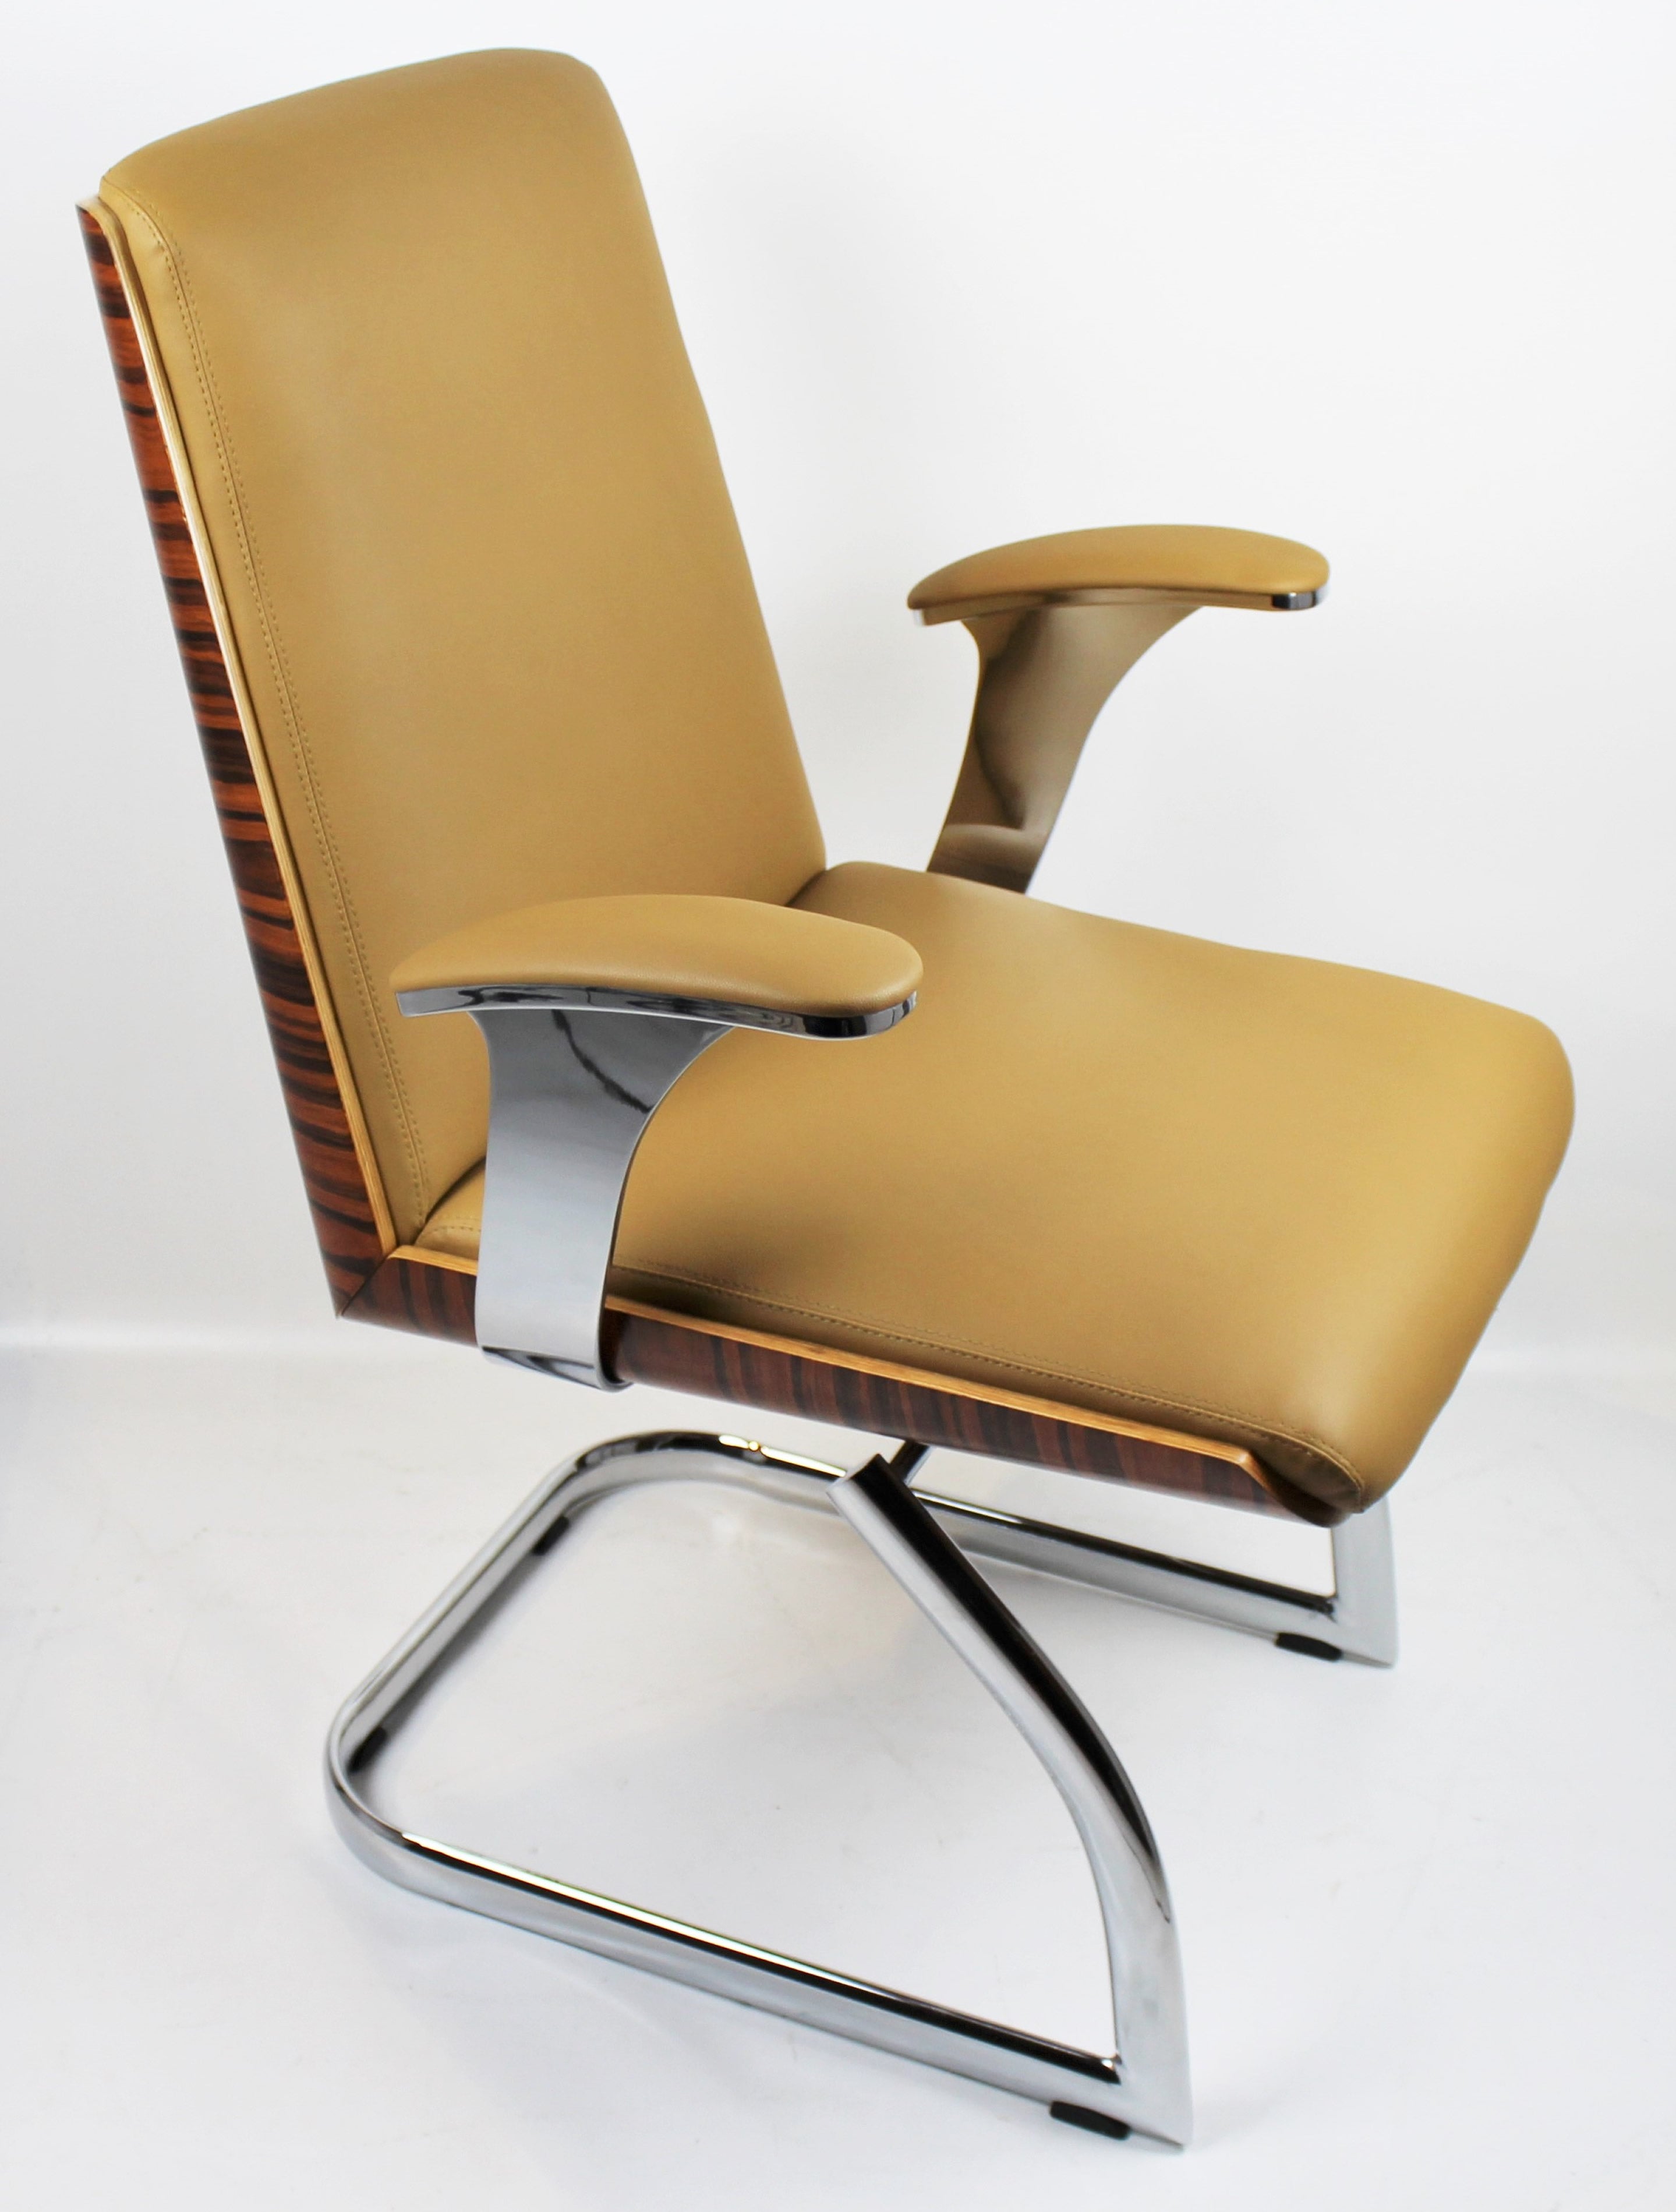 Beige Leather Chair with Walnut Veneer Shell - CHA-1205C North Yorkshire